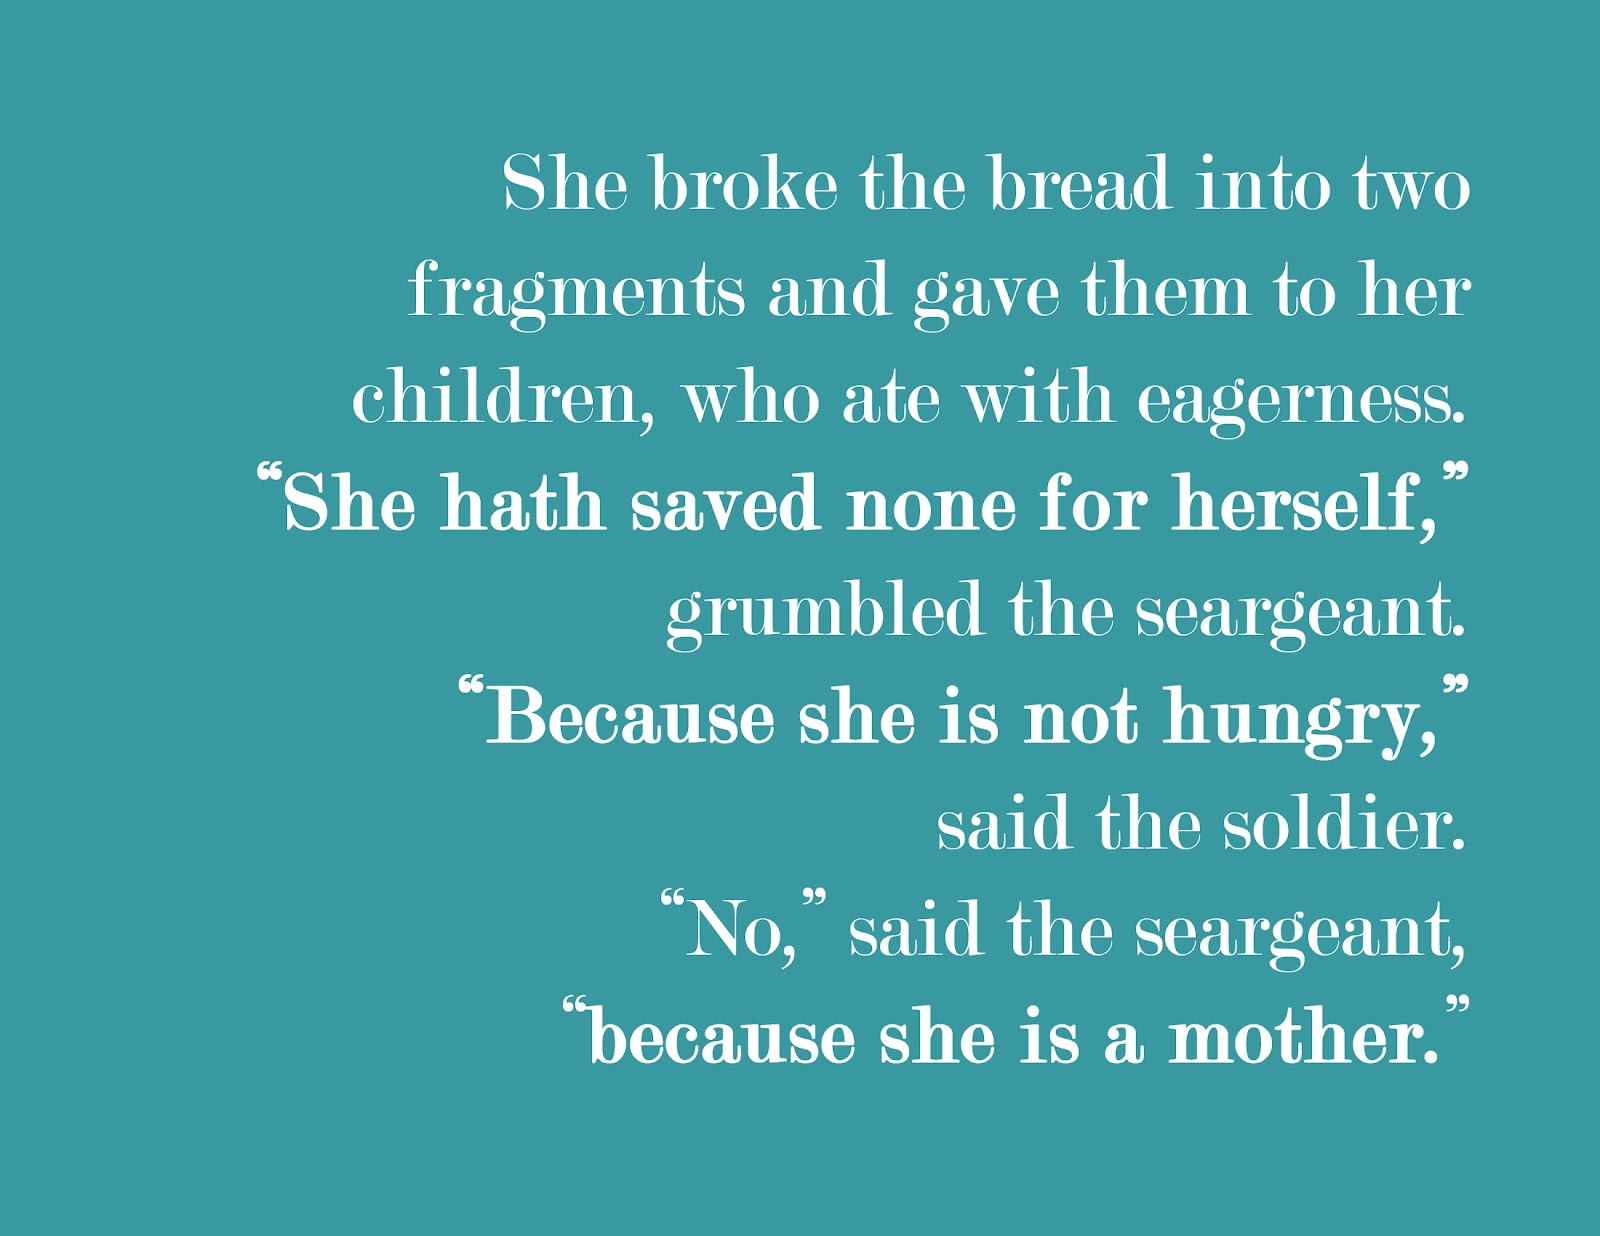 She broke the bread into two fragments and gave them to her children, who ate with eagerness. 'She hath kept none for herself,' grumbled the sergeant, because...